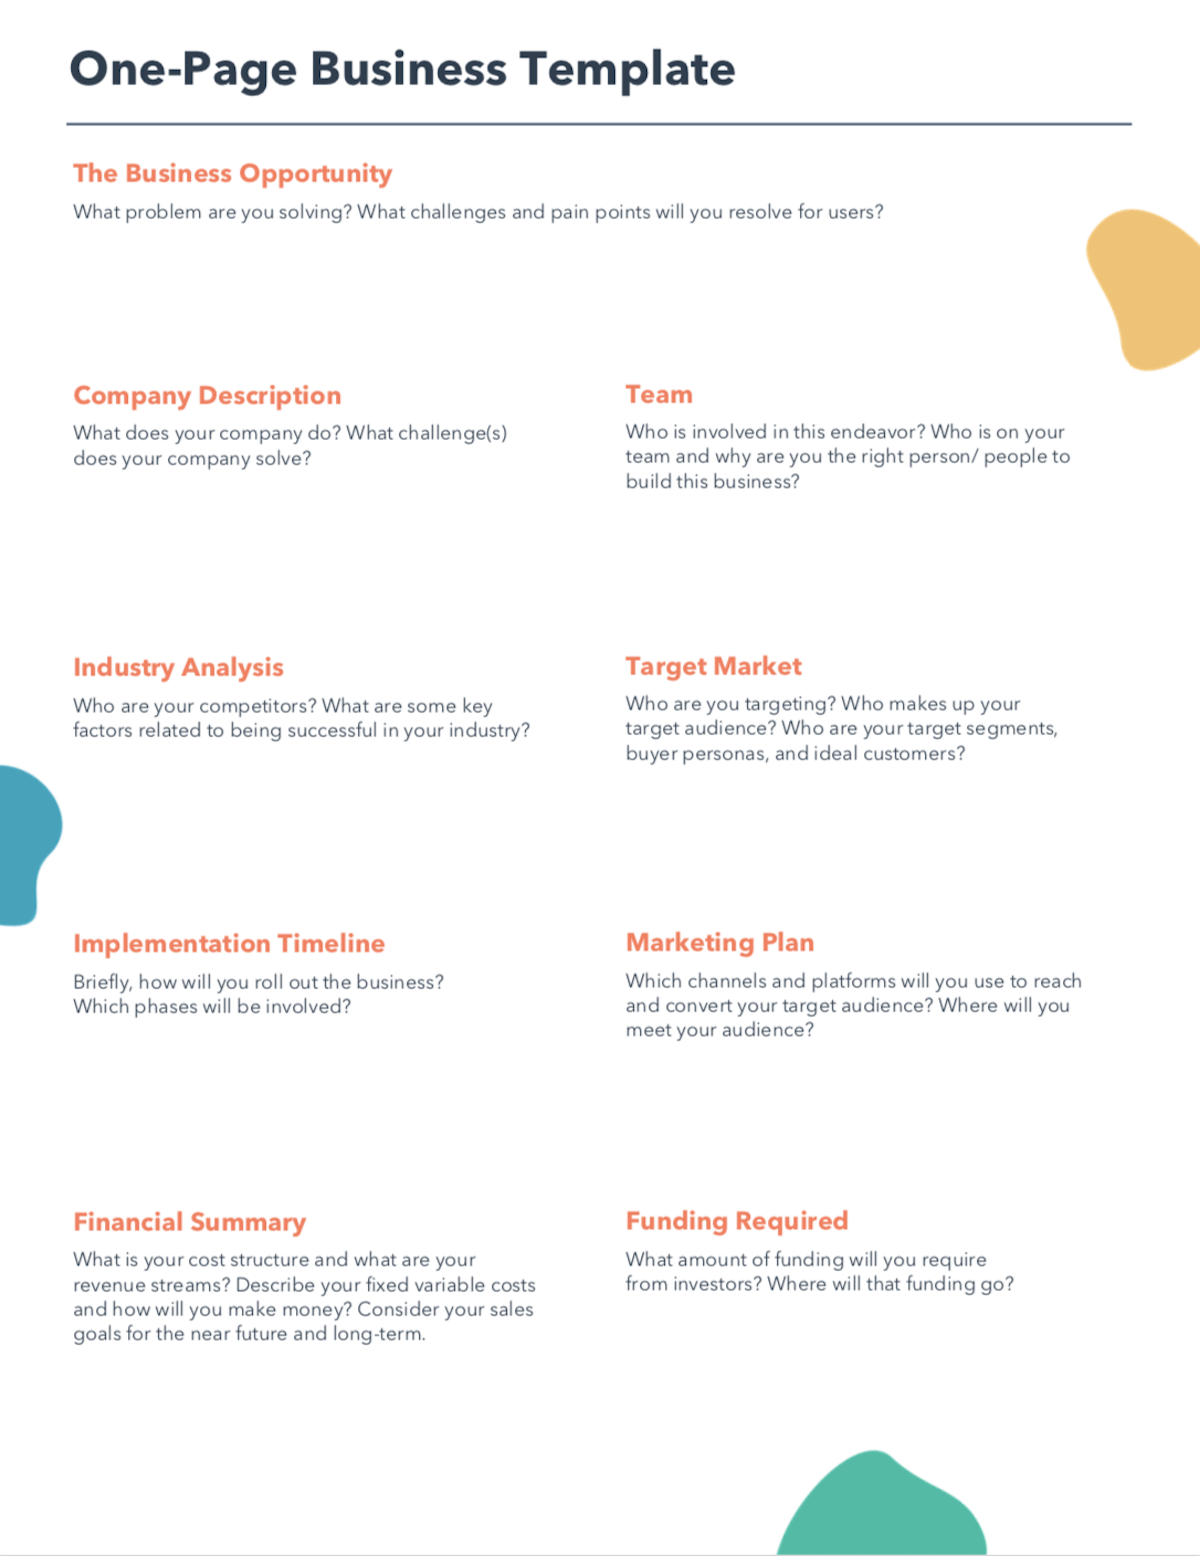 Free One Page Business Plan Template for PDF  Word  HubSpot Inside Business Plan For A Startup Business Template